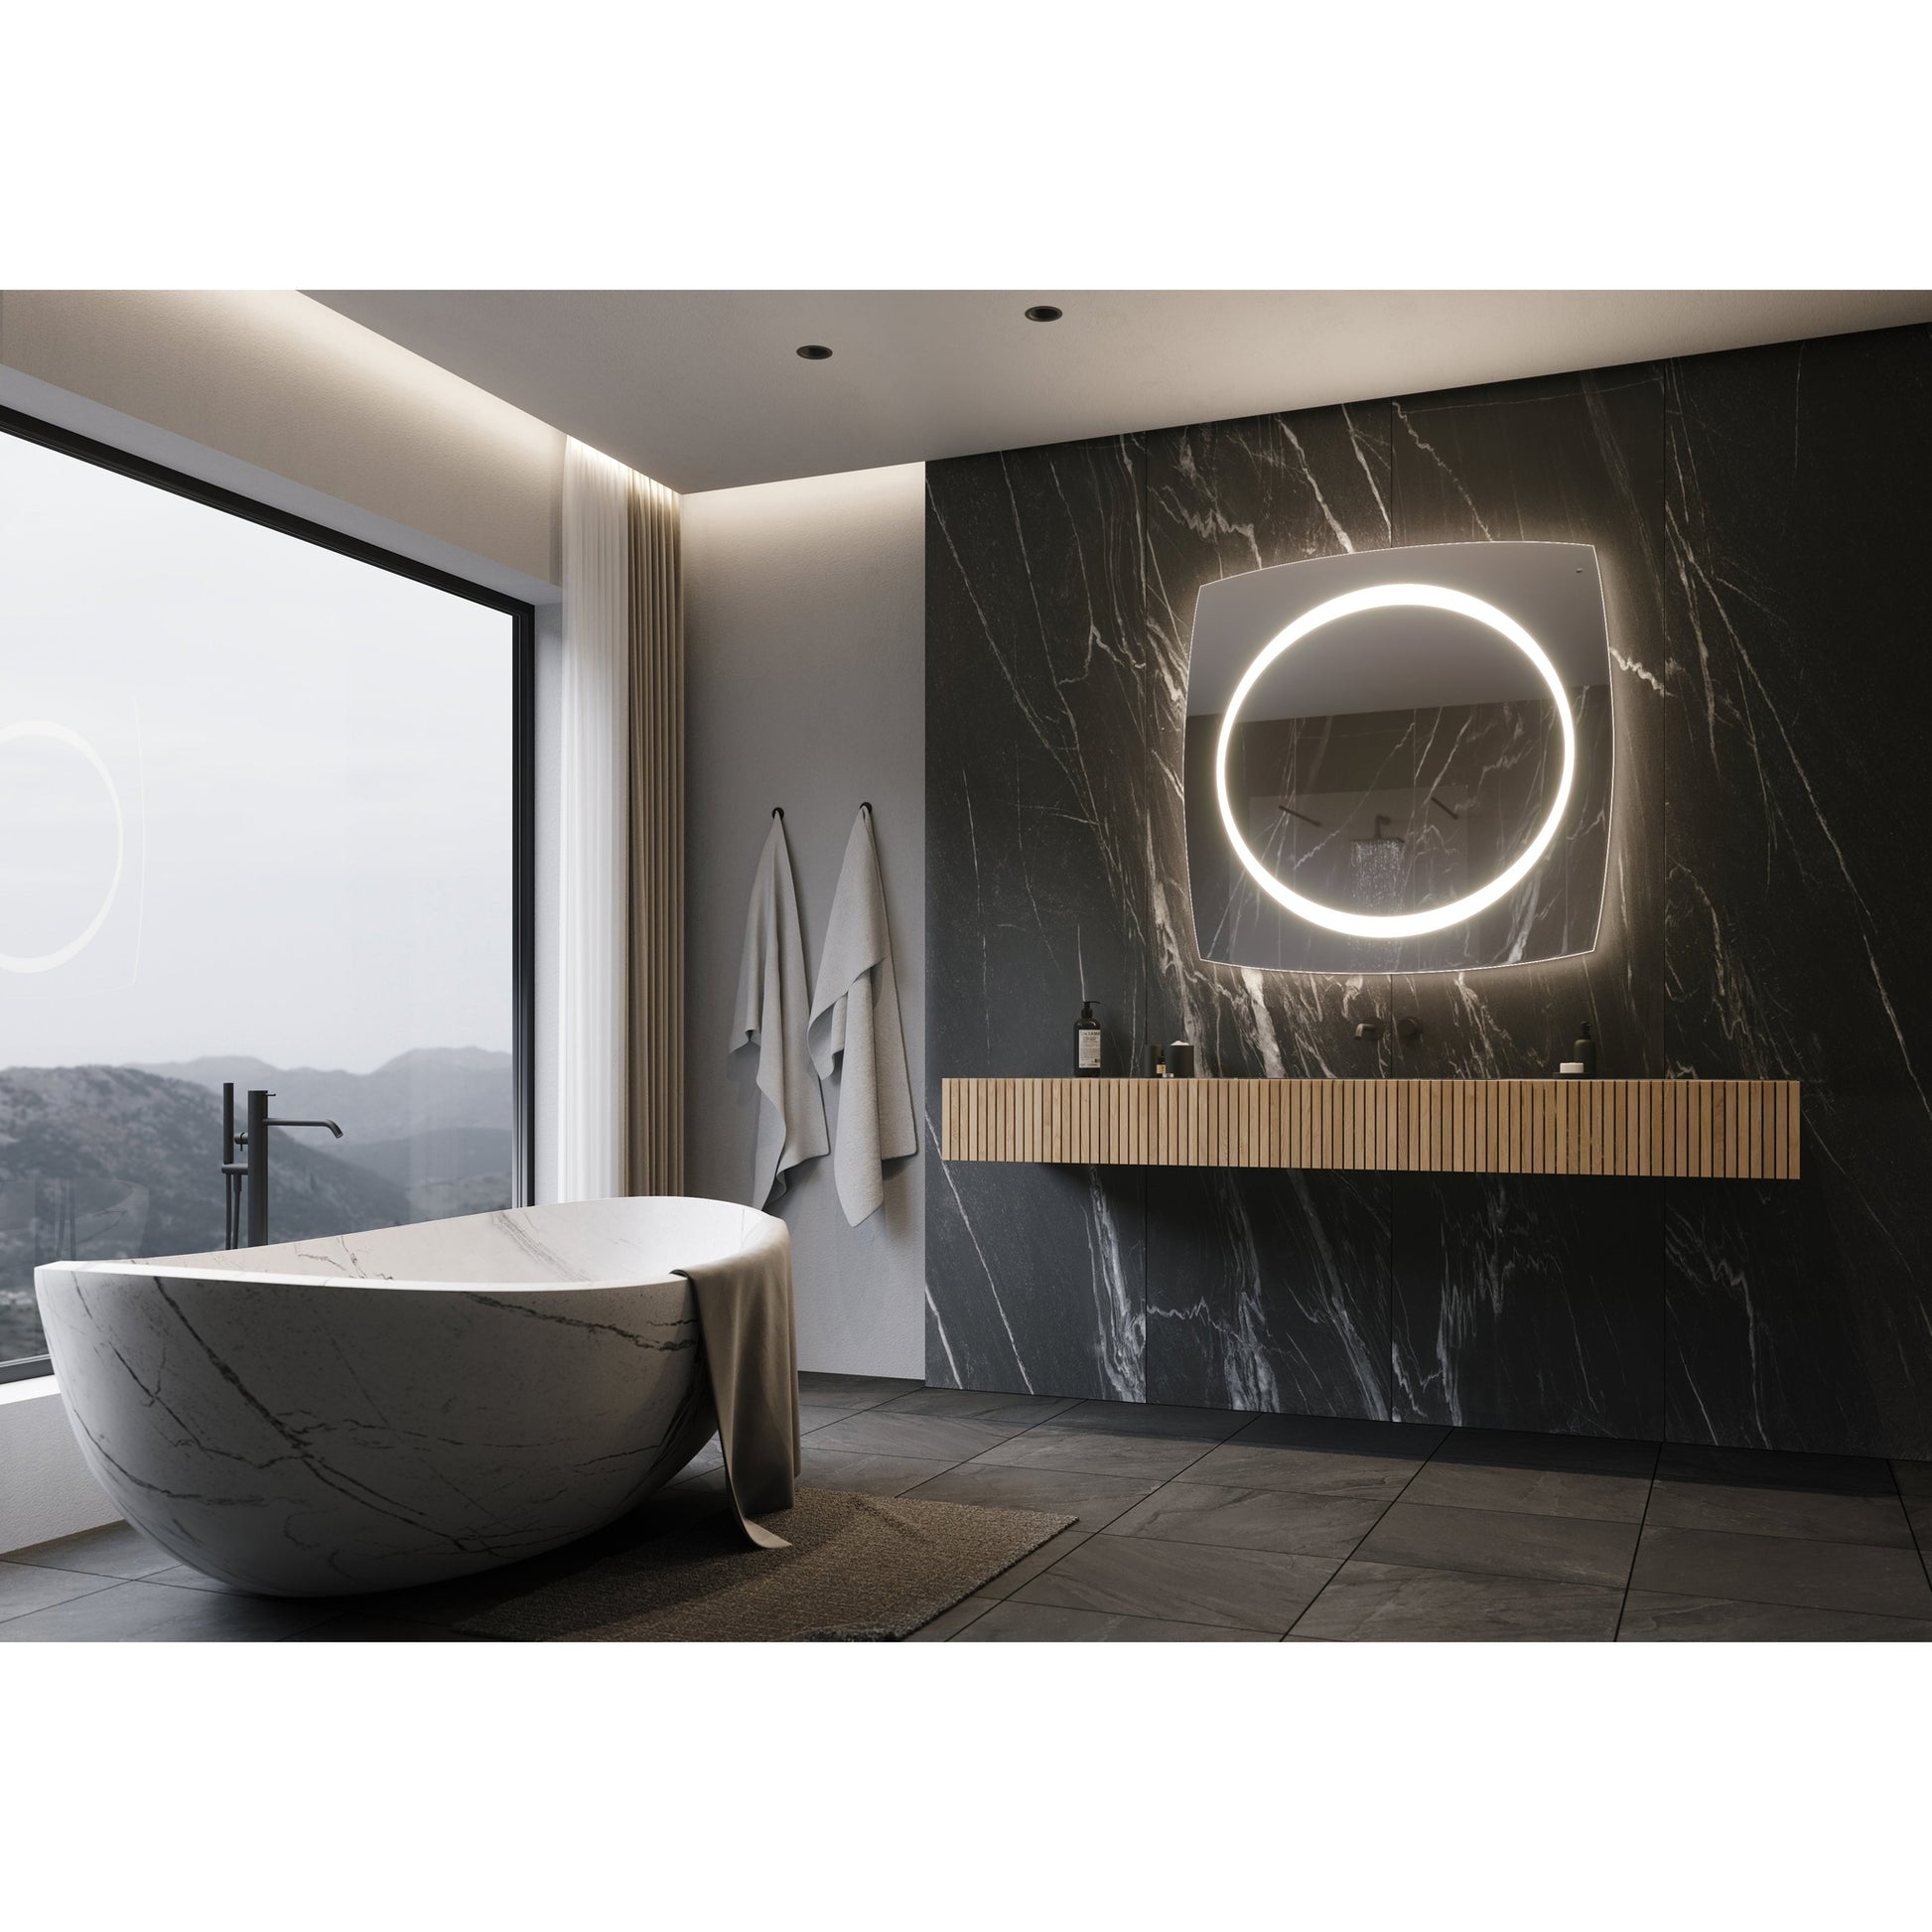 Paris Mirror Halo 40" x 40" Front-lit Illuminated Super Bright Dimmable Wall-Mounted 6000K LED Mirror With Angel Halo Design